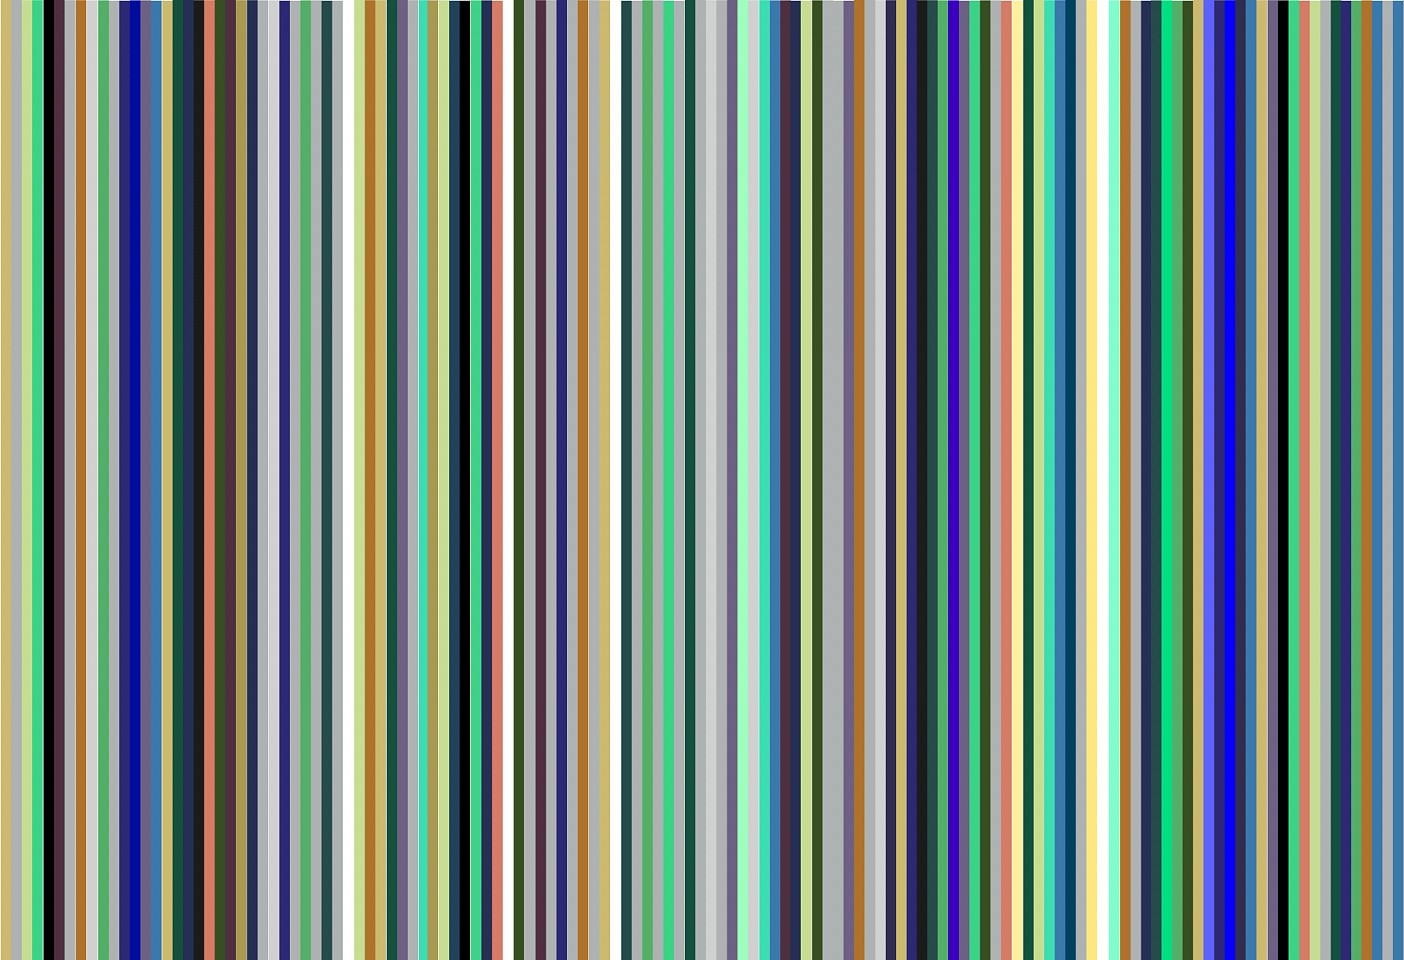 Dane Albert, Color Bars #13, 2023
Acrylic on canvas (Concept), 48 x 72 in. (121.9 x 182.9 cm)
Series of colored lines and shapes in multiple configurations
DA.2023.bars-013